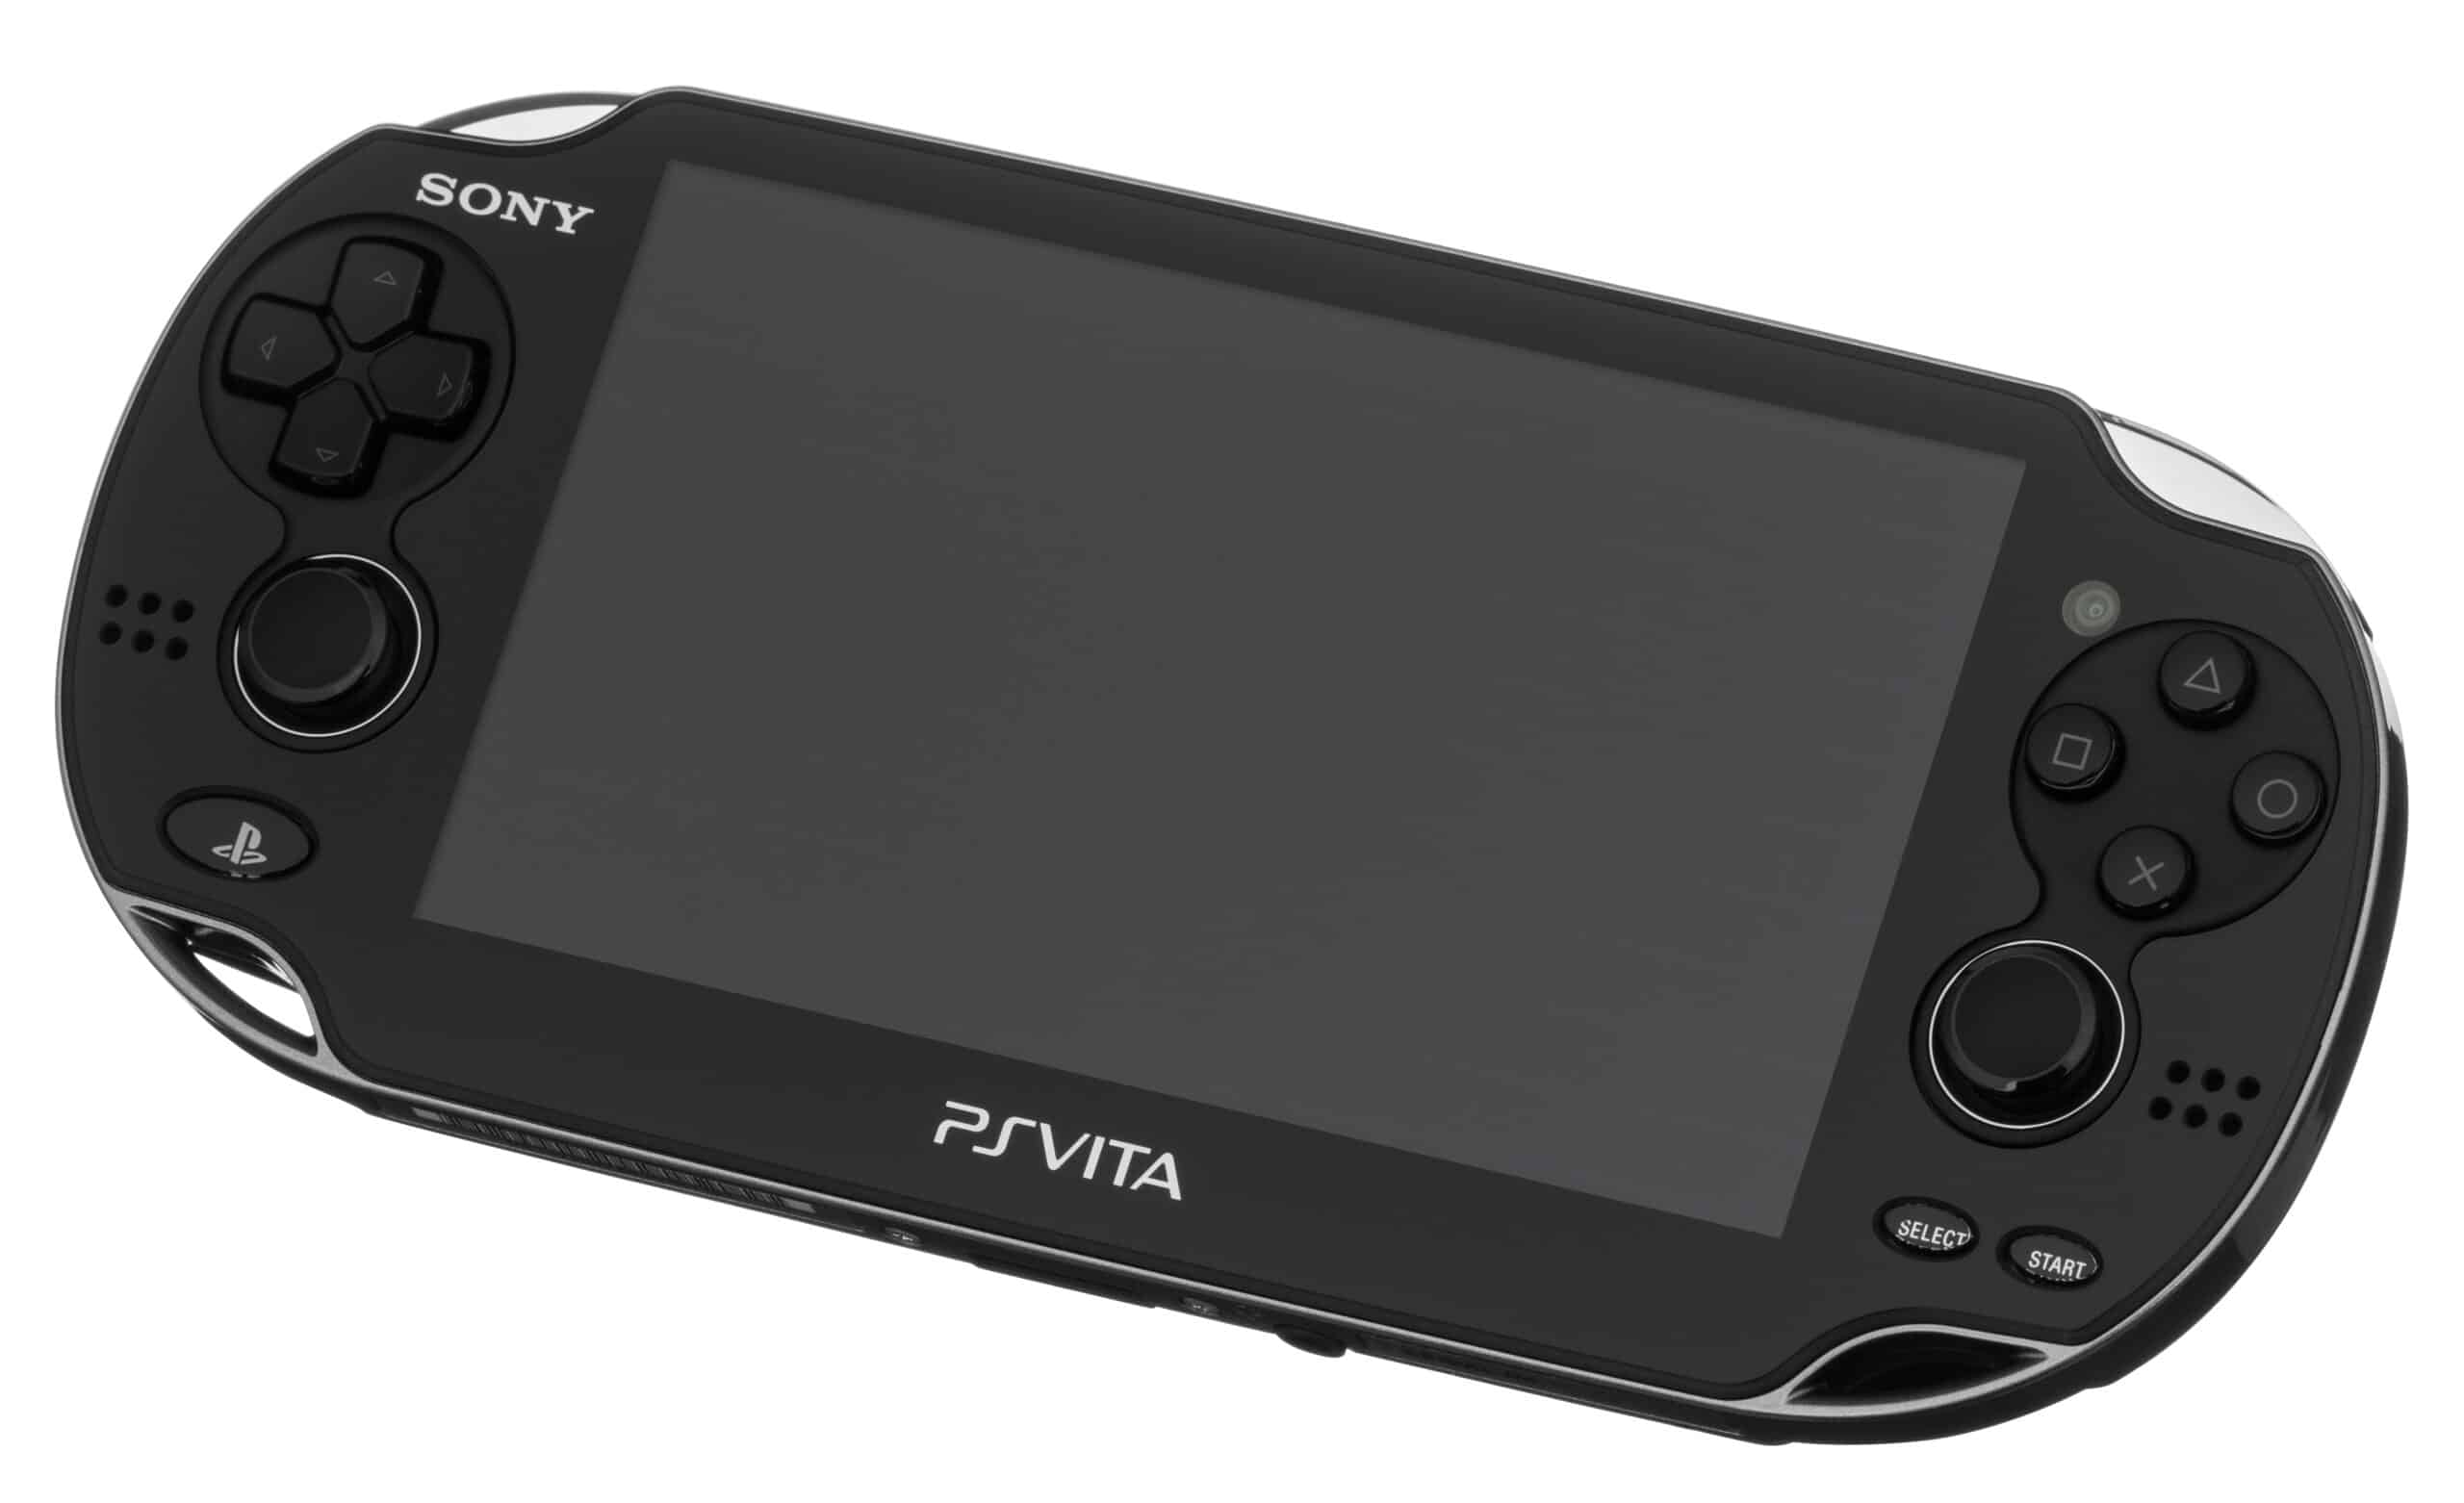 Is Sony Considering a PS Vita 2 or Any Other Handheld Console?